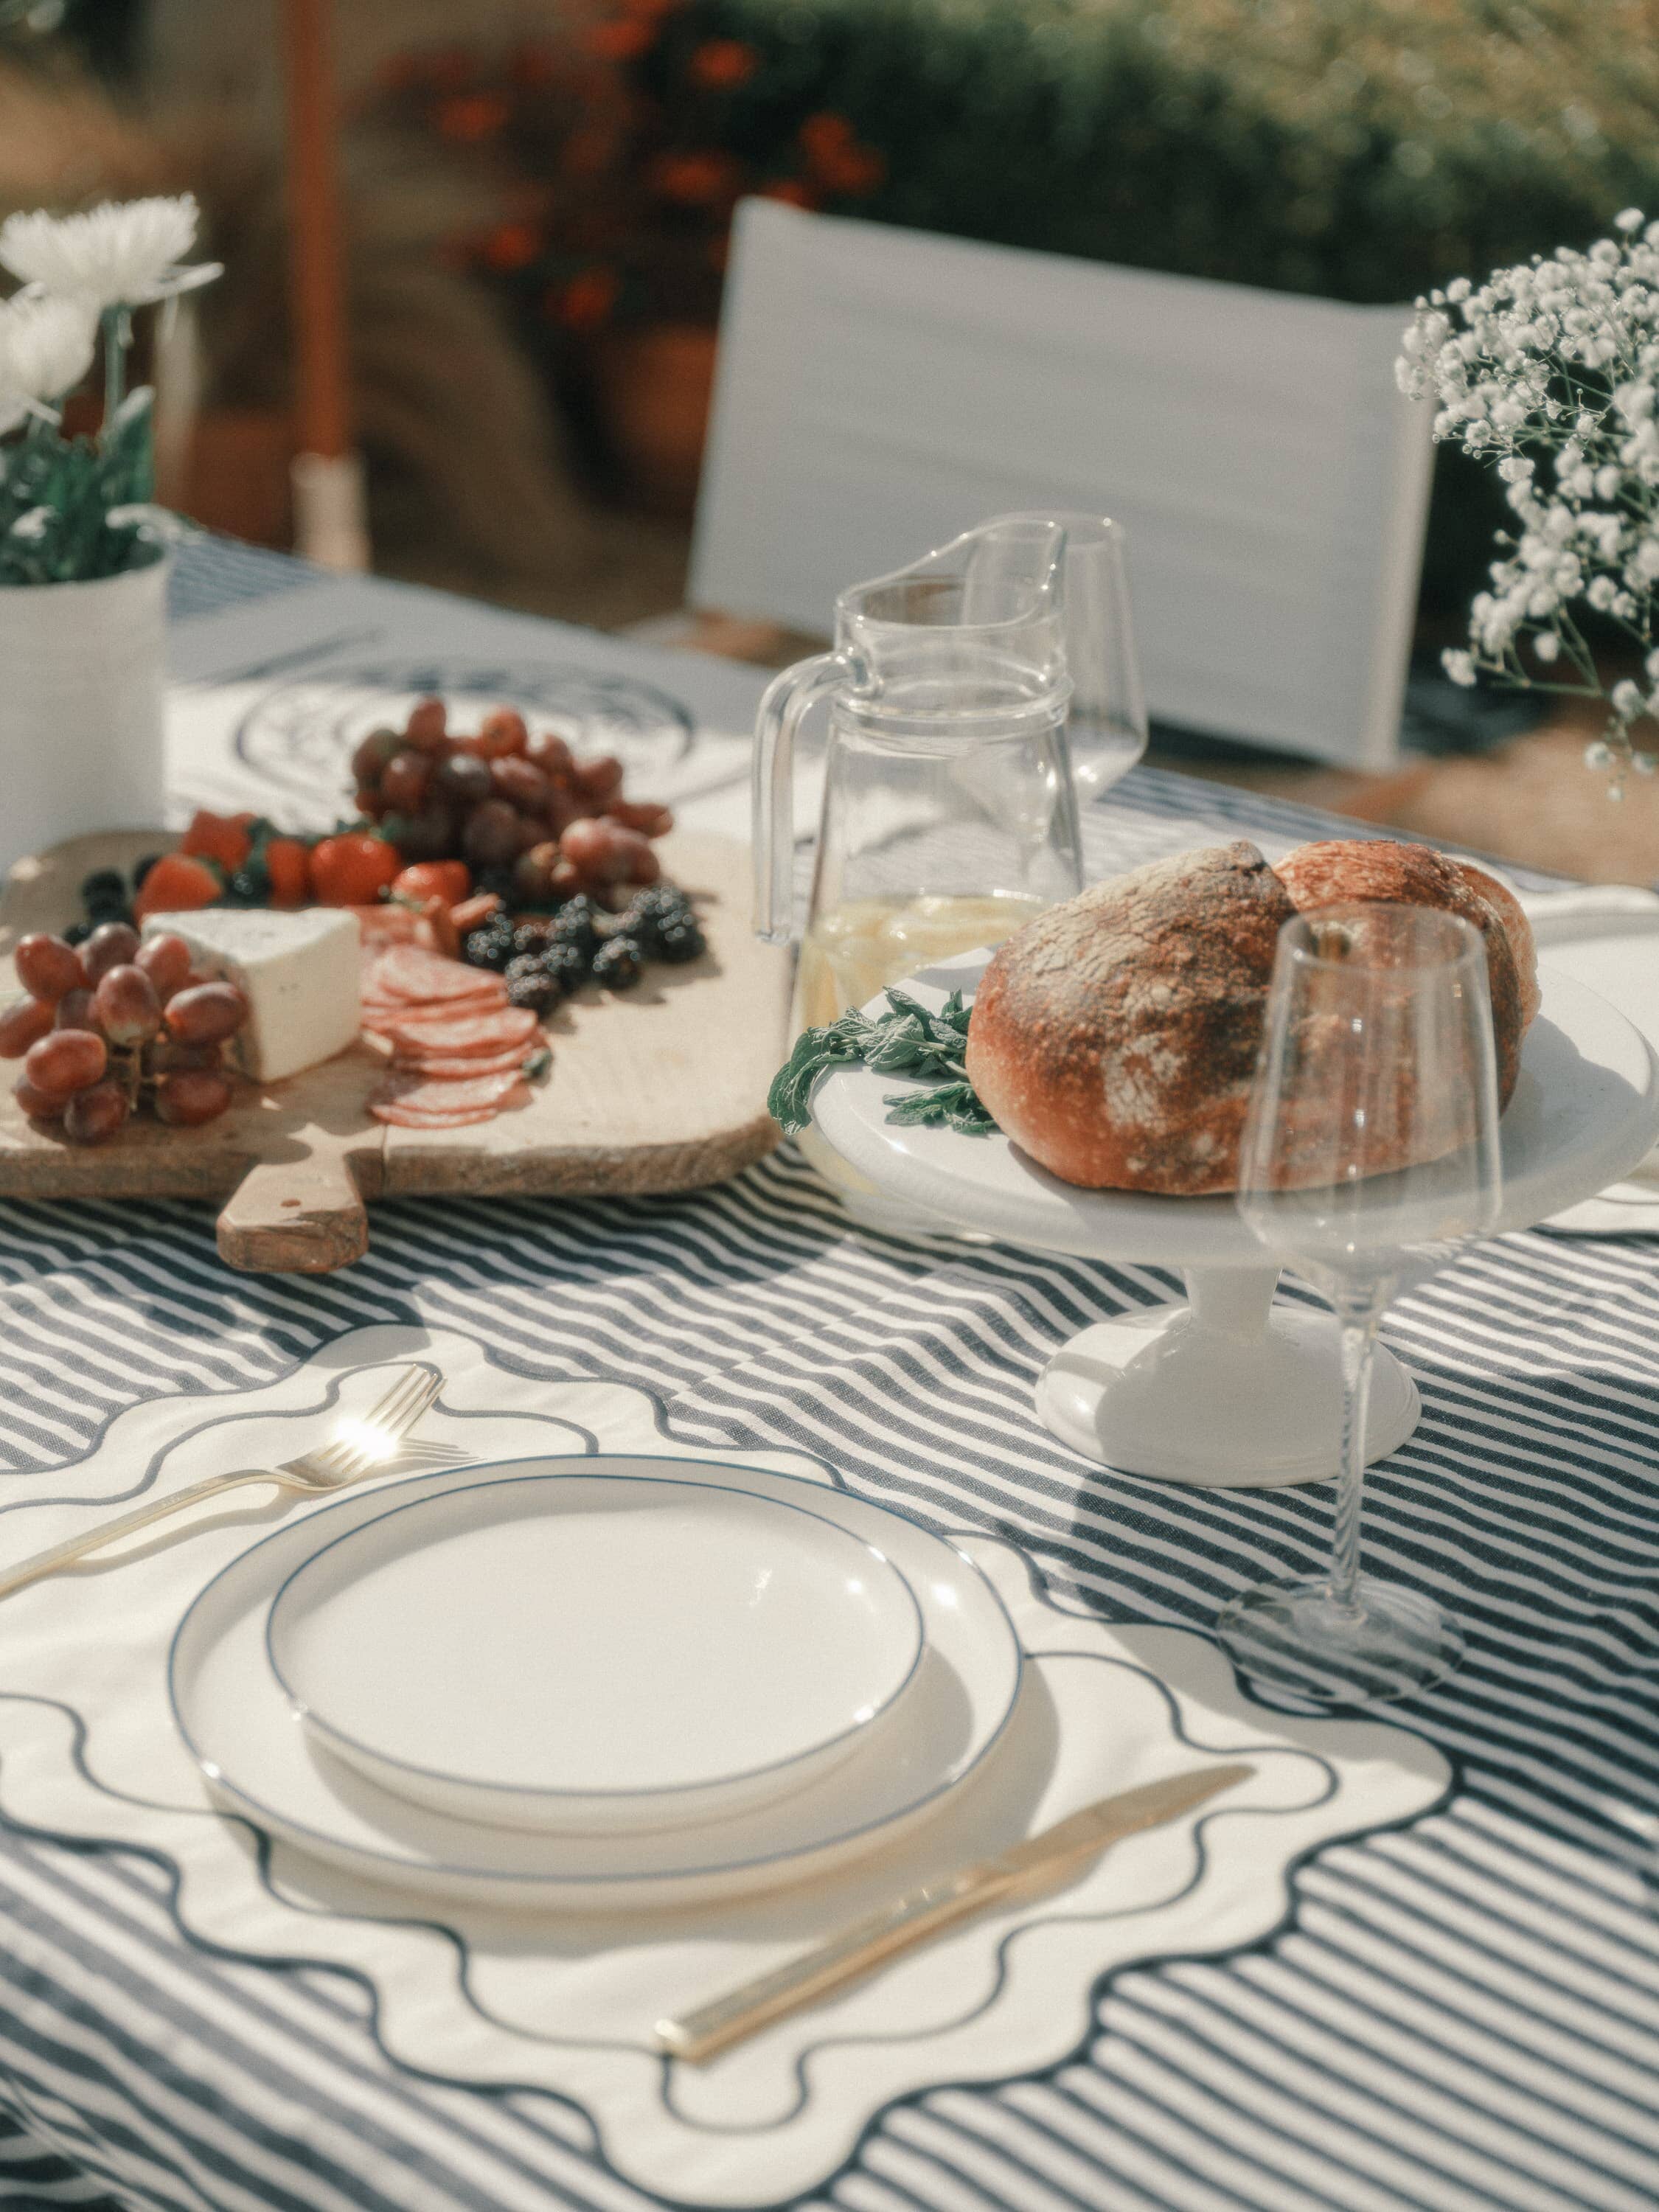 Al fresco dining table with placemats